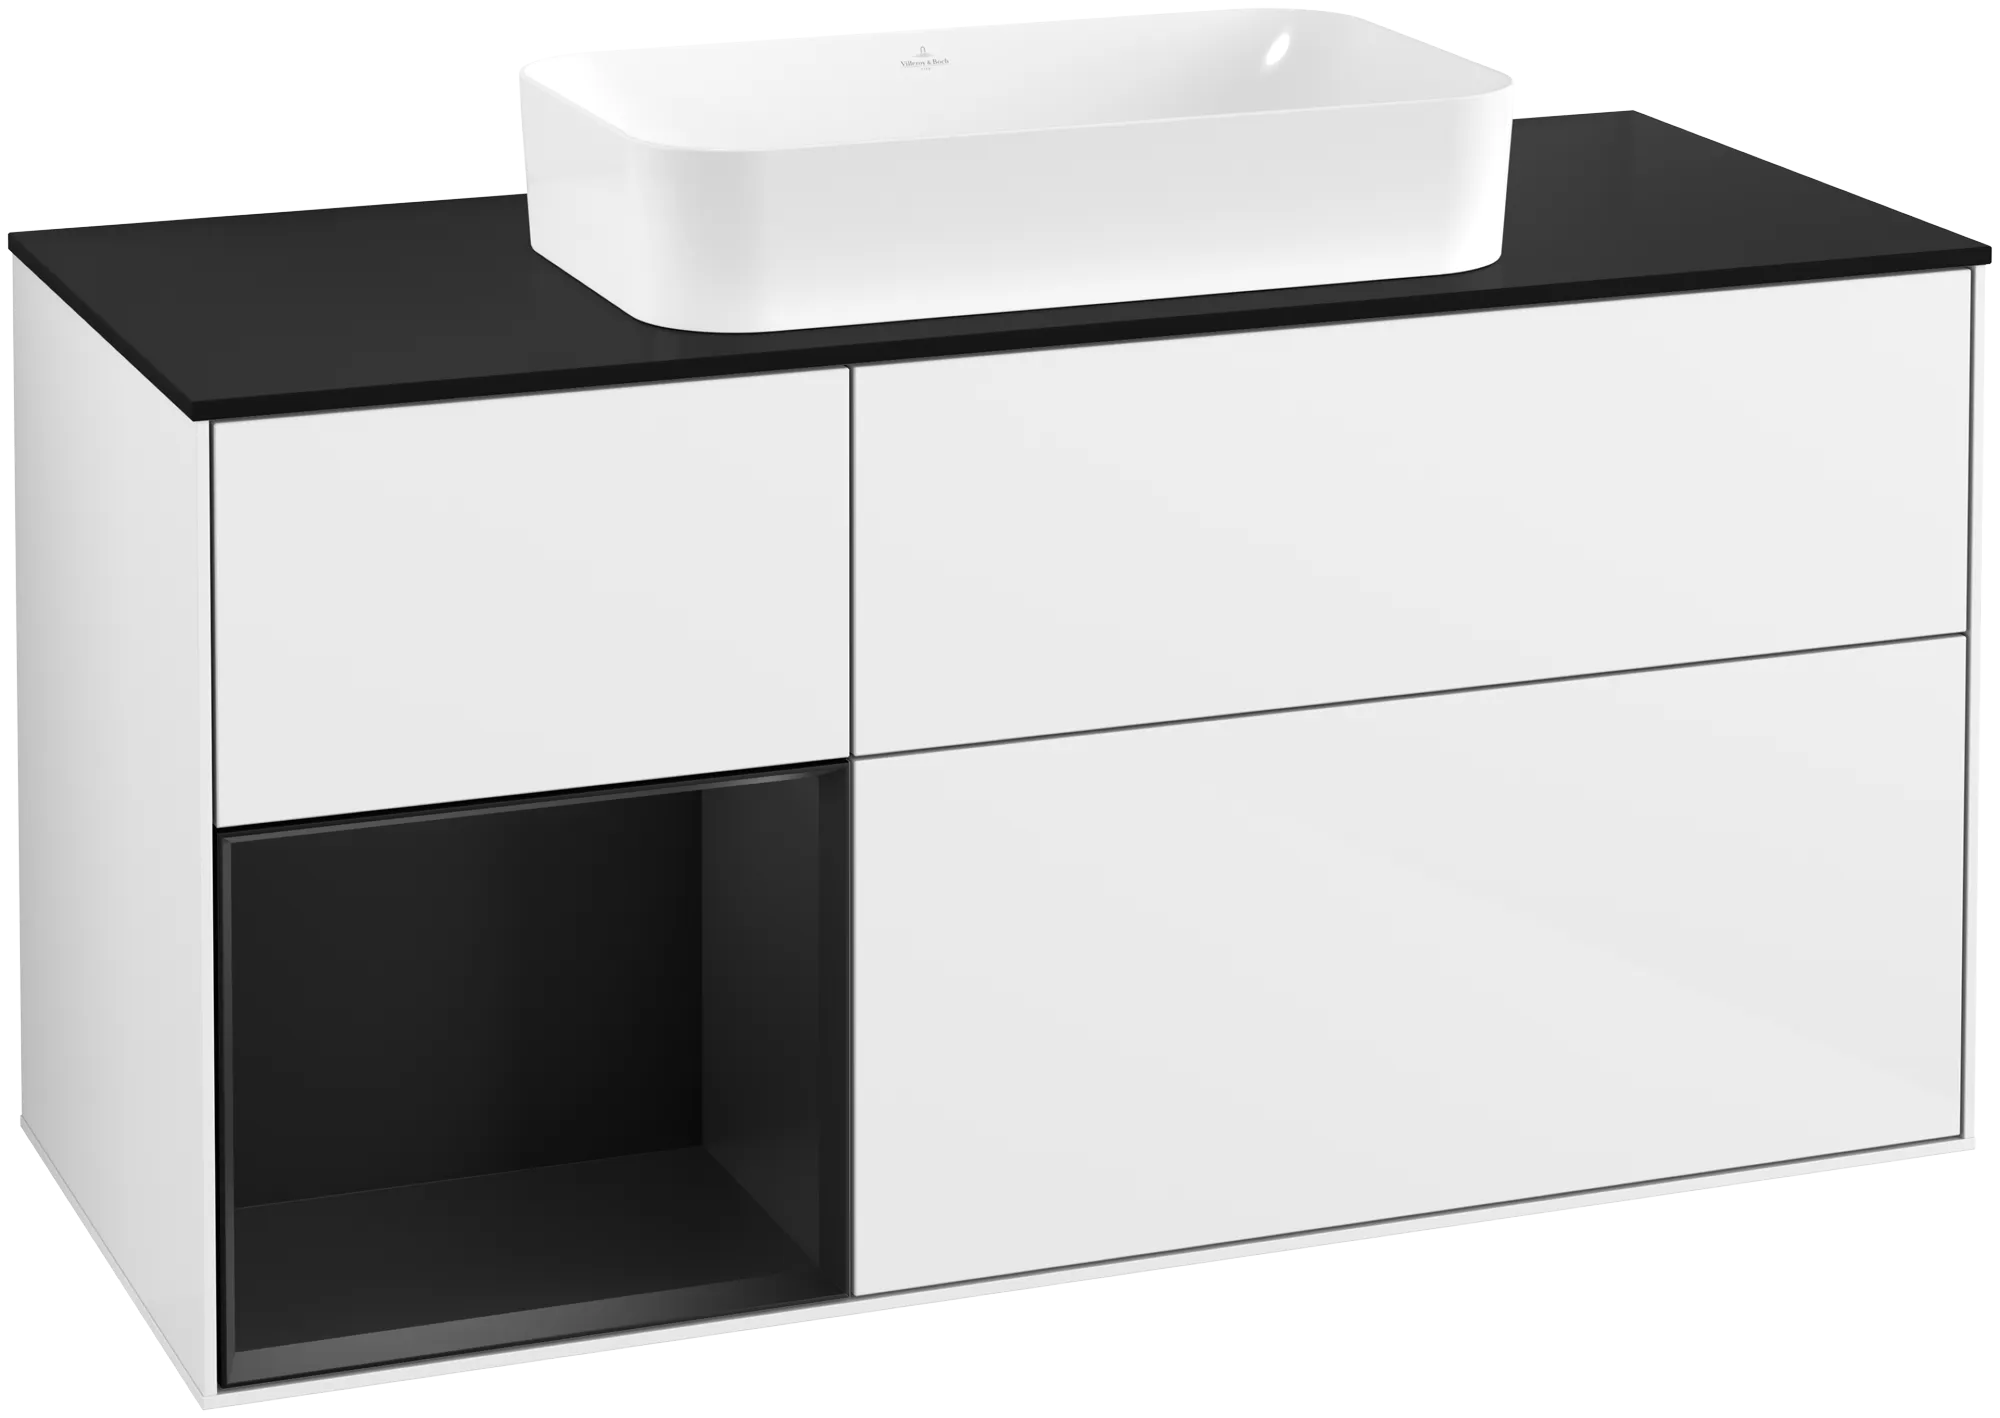 Picture of VILLEROY BOCH Finion Vanity unit, with lighting, 3 pull-out compartments, 1200 x 603 x 501 mm, Glossy White Lacquer / Black Matt Lacquer / Glass Black Matt #G702PDGF